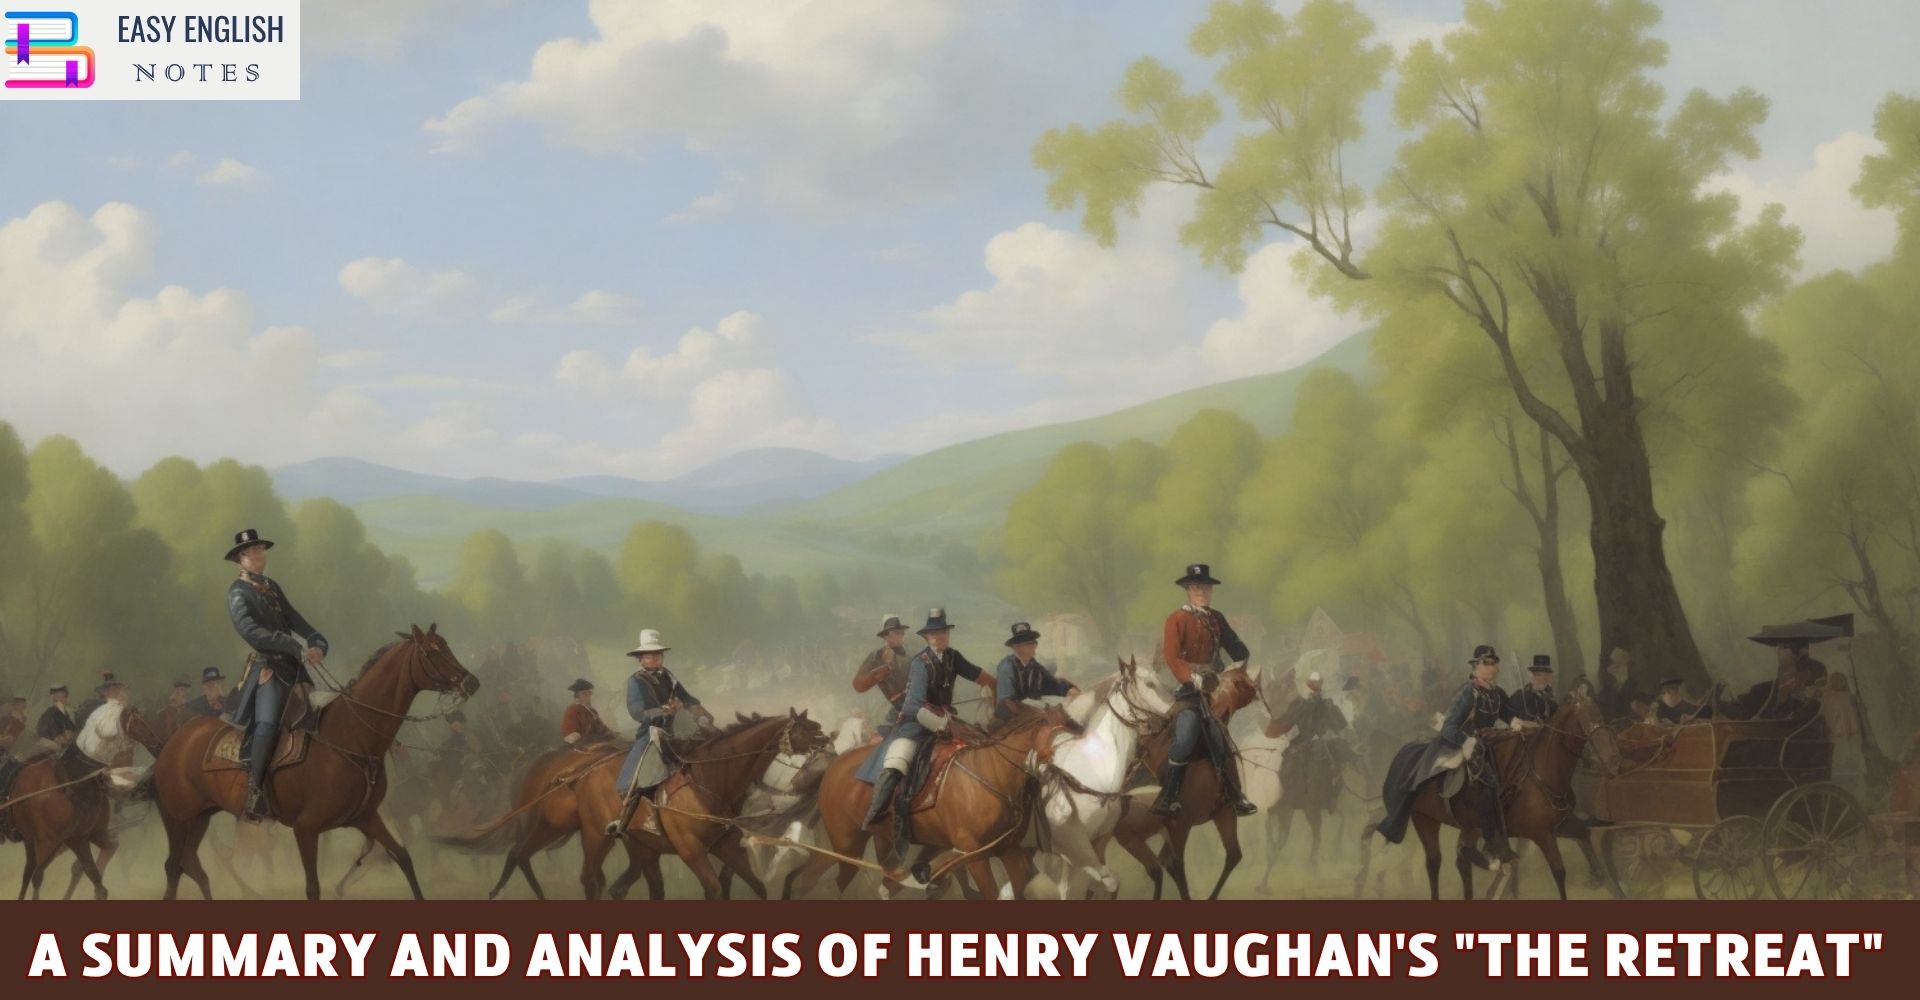 A Summary and Analysis of Henry Vaughan's "The Retreat"